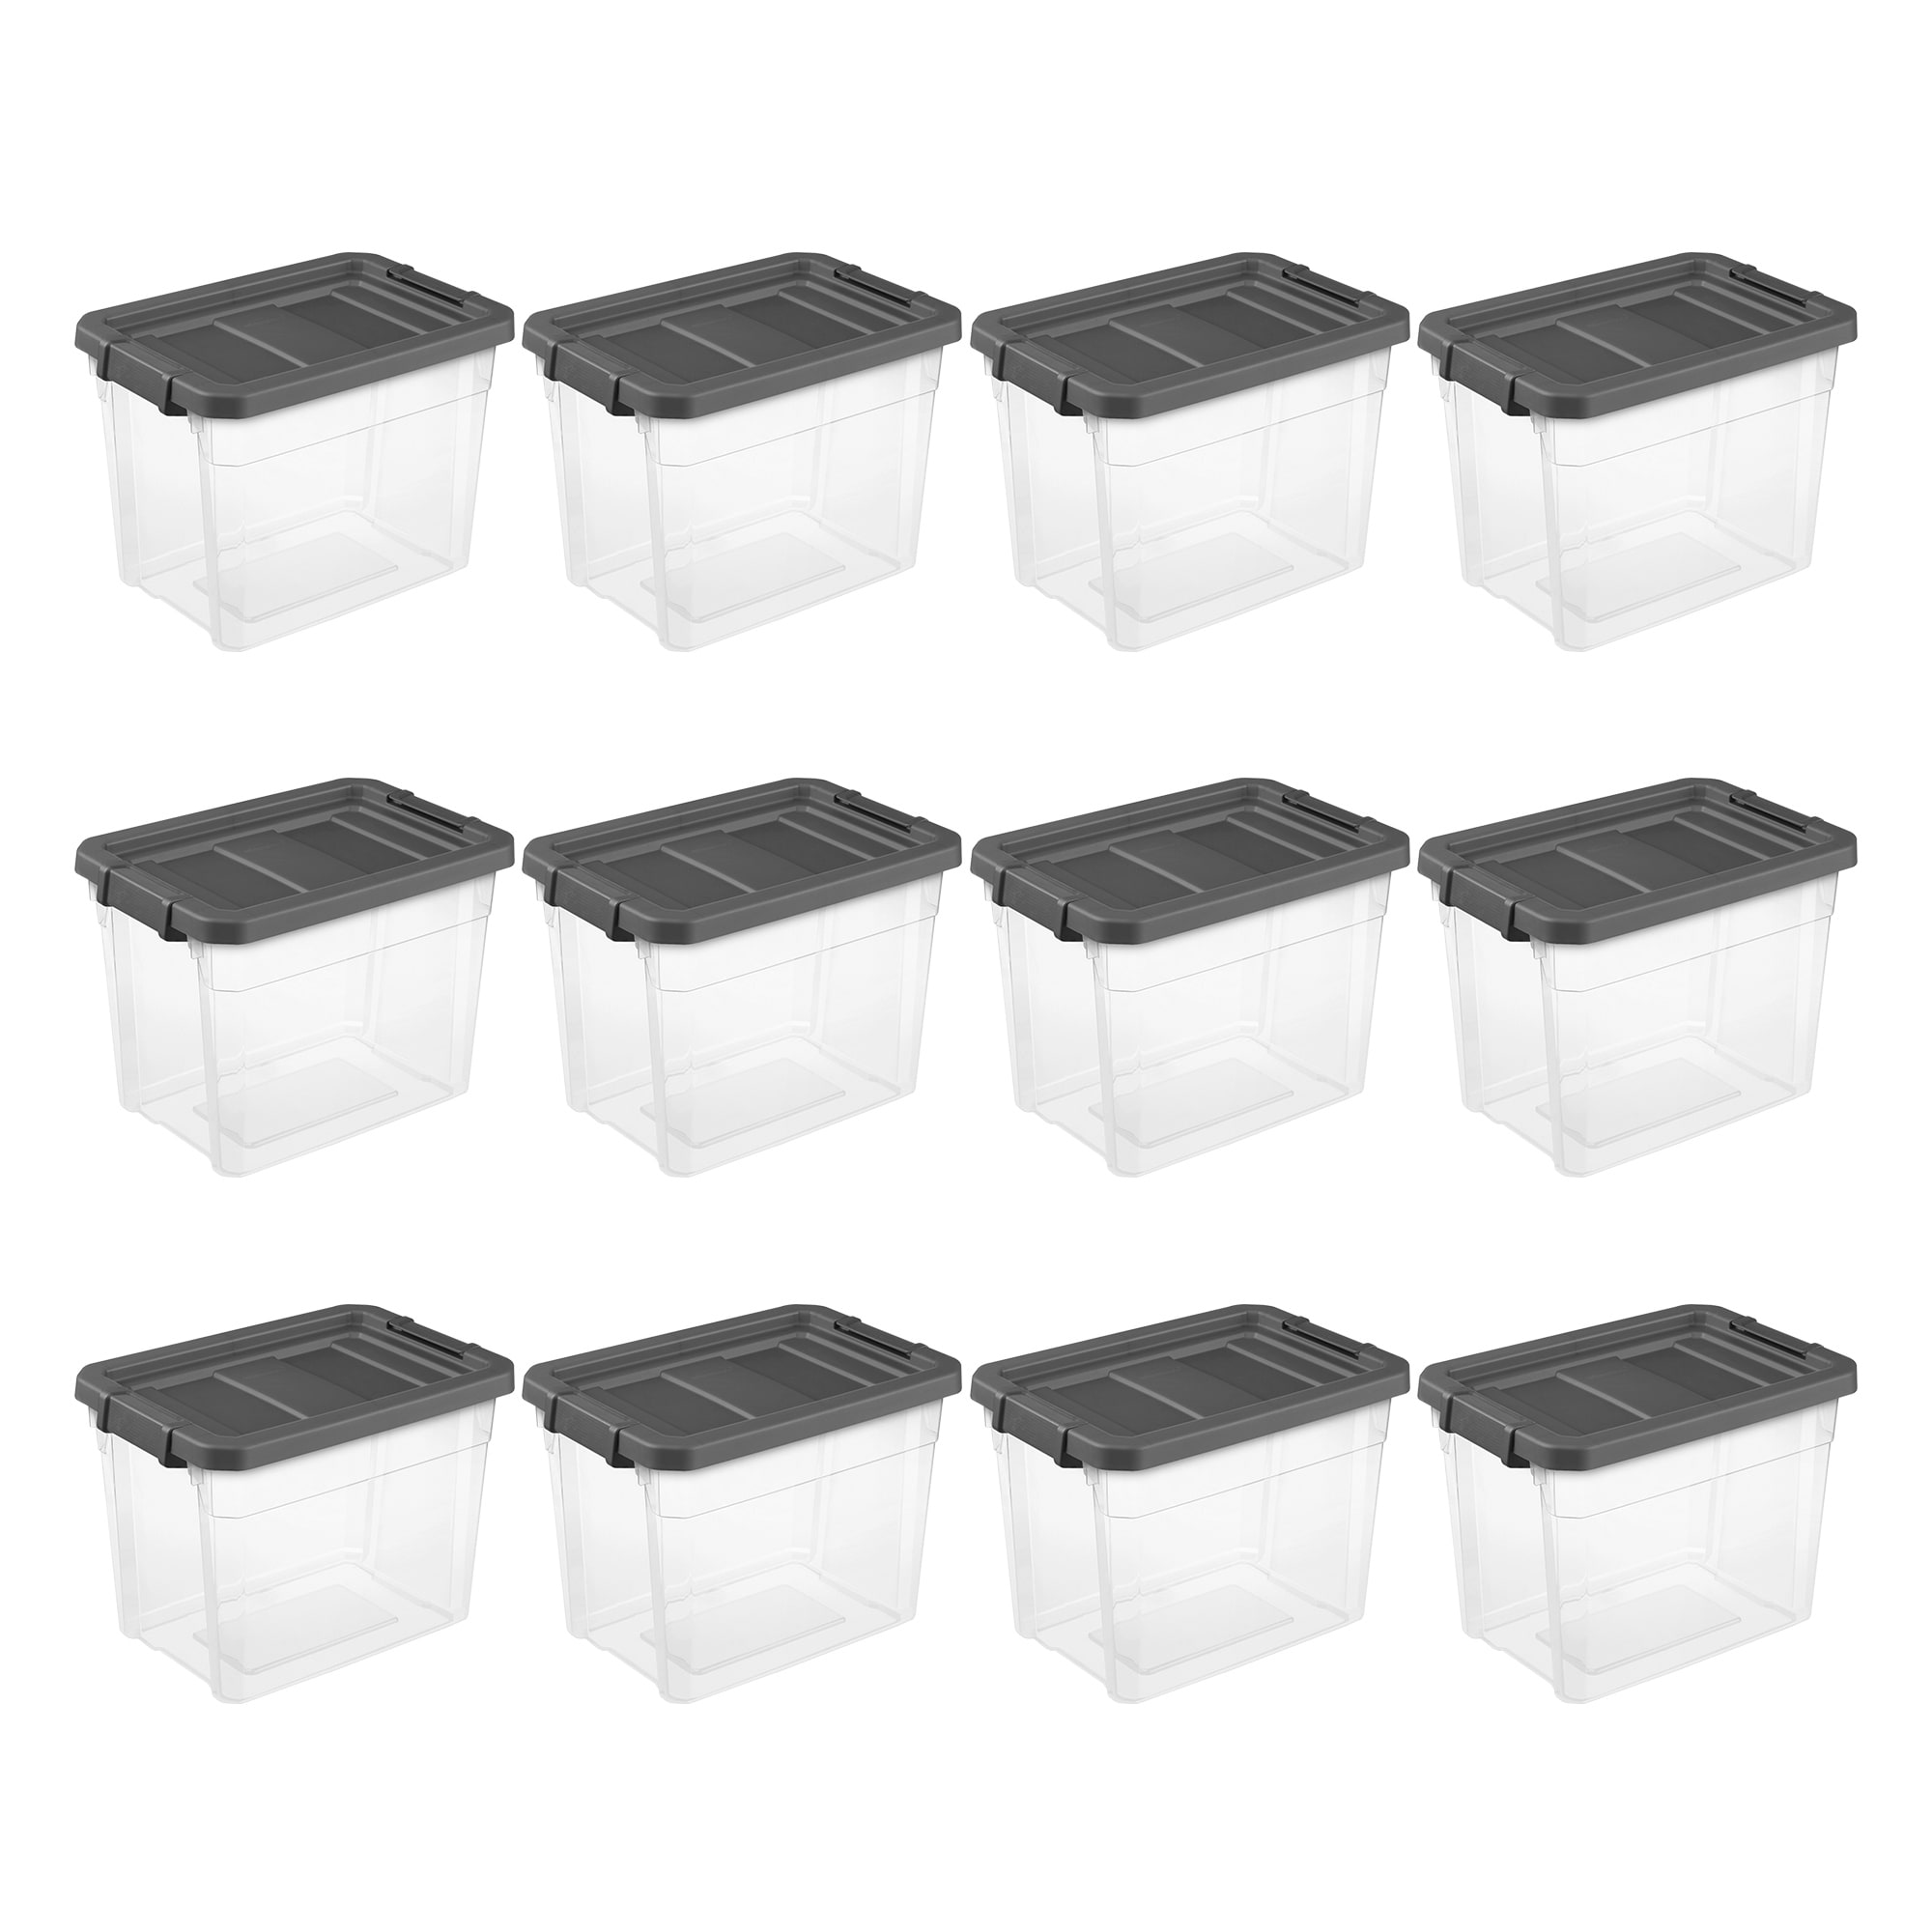 https://ak1.ostkcdn.com/images/products/is/images/direct/686f66bab3c496f66ceacee5e6dd2b76b99bc3aa/Sterilite-30-Qt-Clear-Plastic-Stackable-Storage-Bin-w--Grey-Latch-Lid%2C-12-Pack.jpg